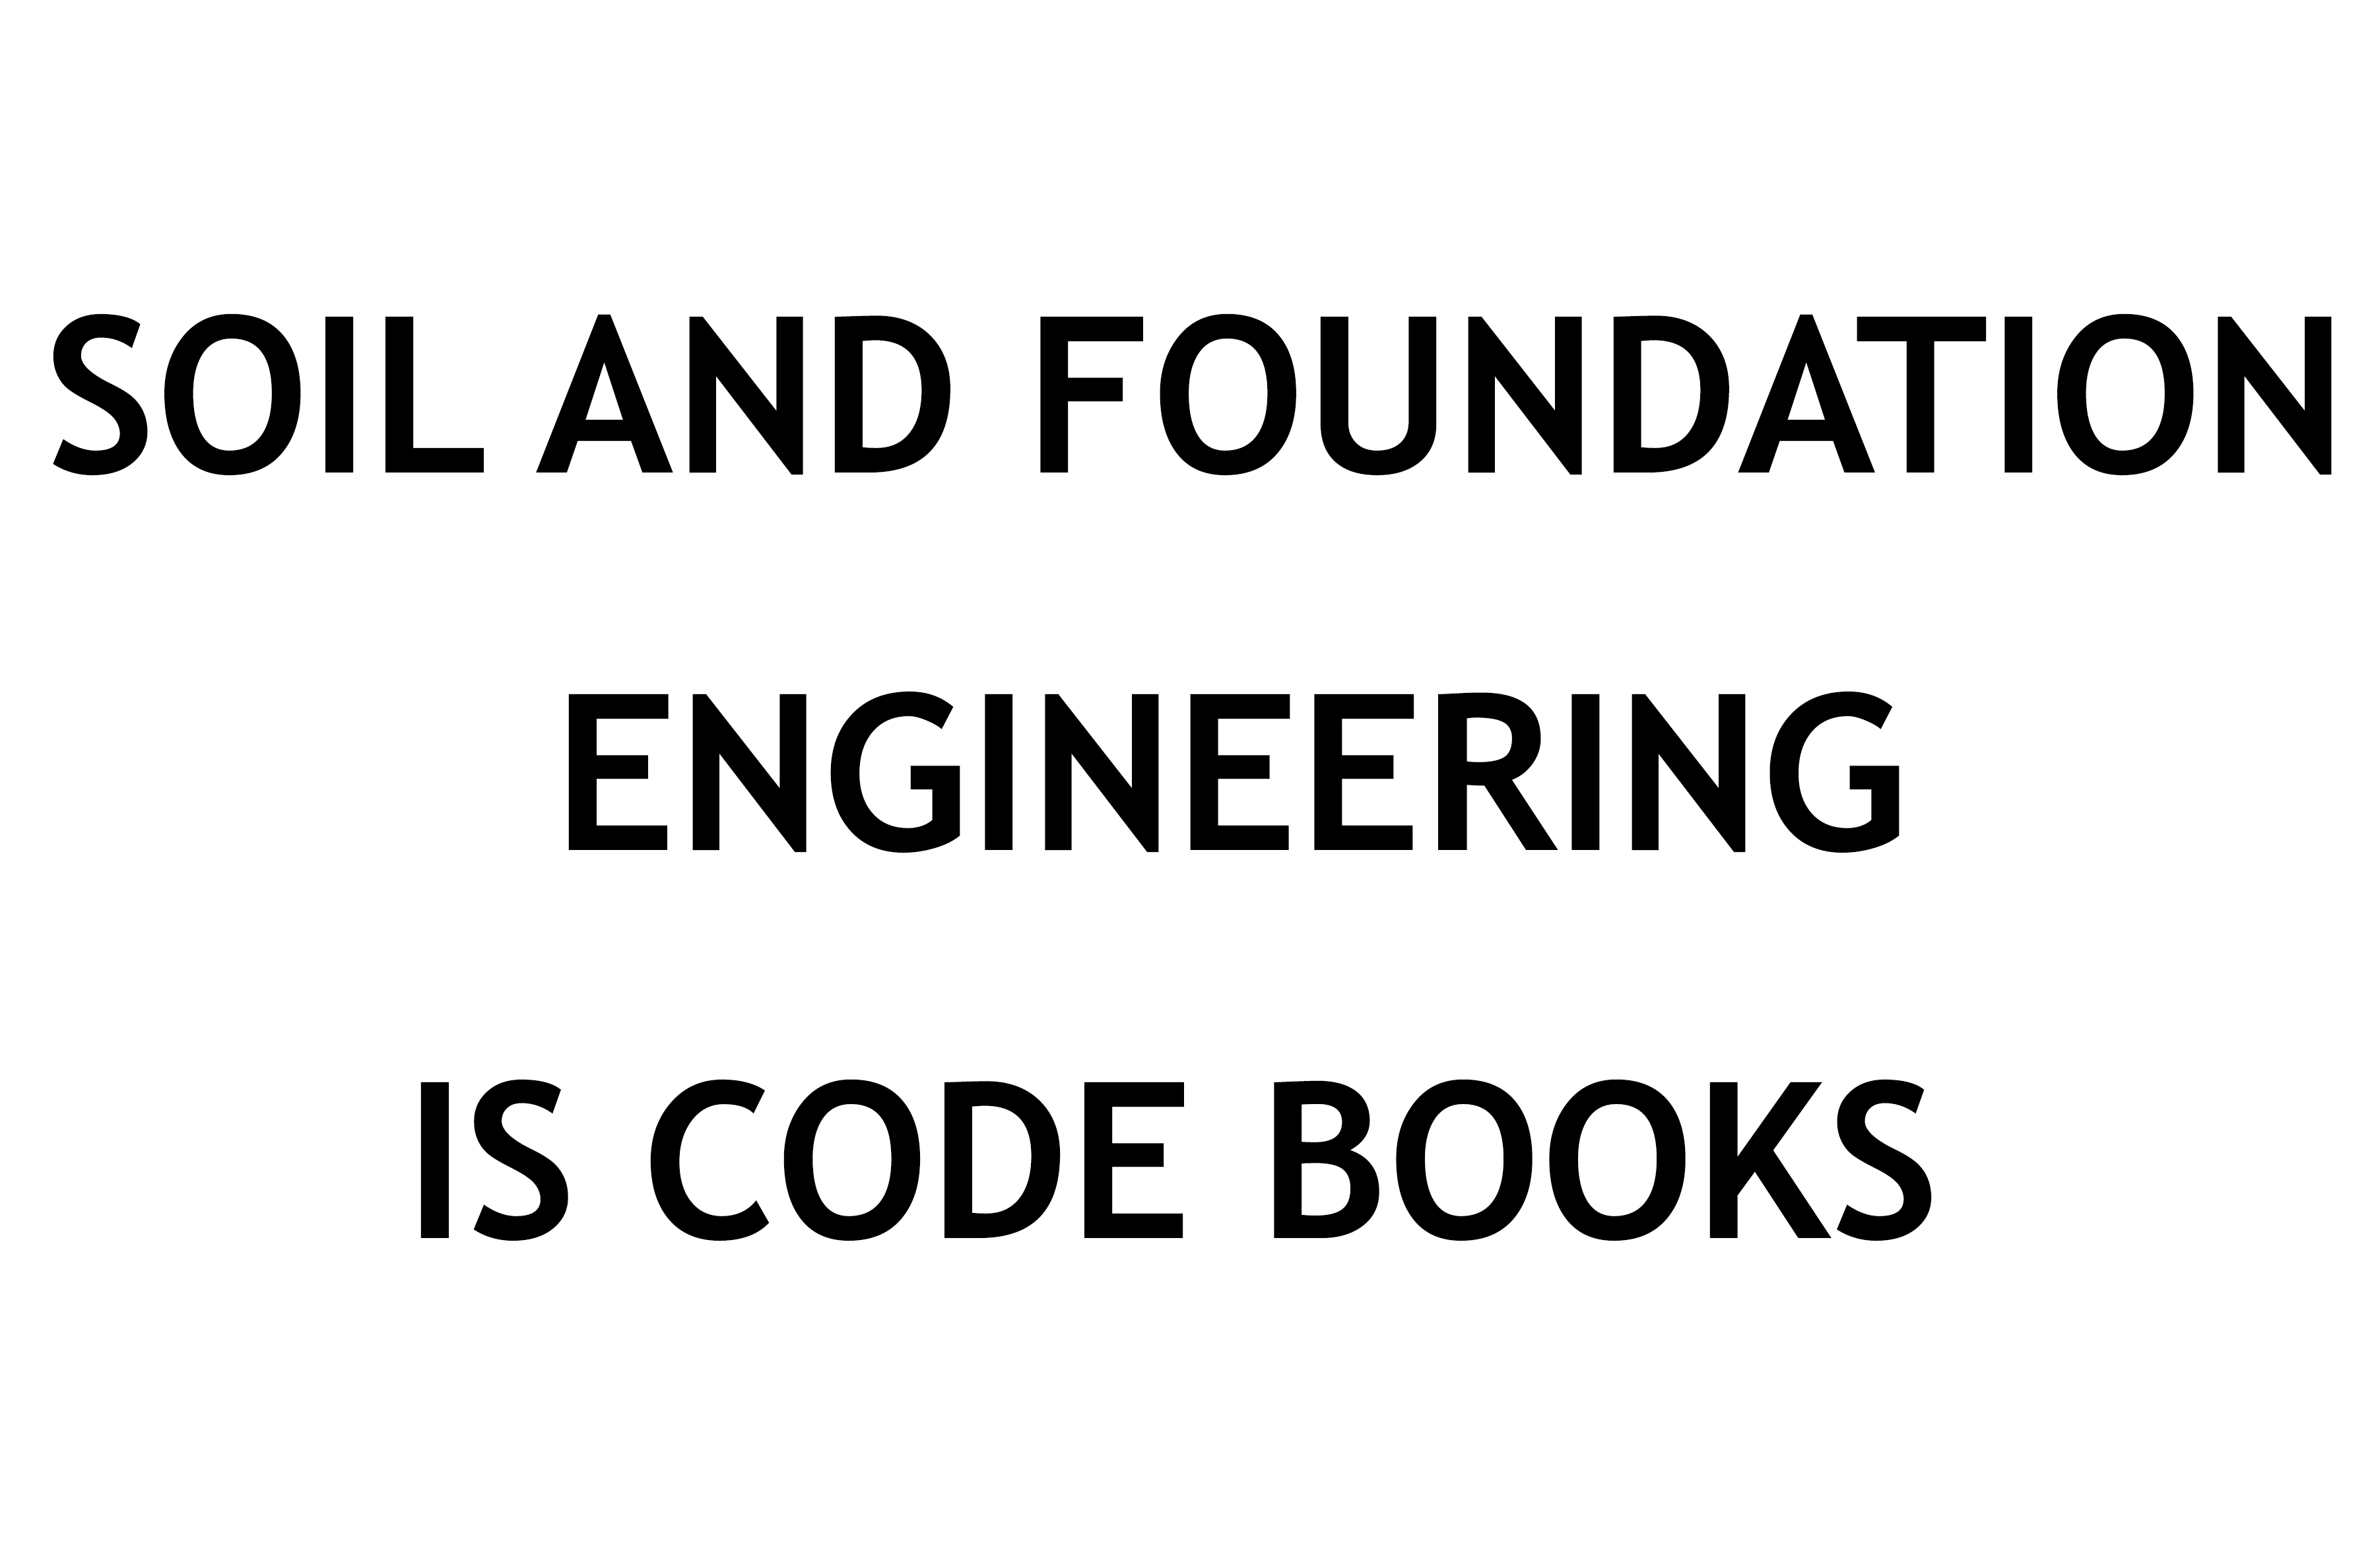 SOIL AND FOUNDATION ENGINEERING INDIAN STANDARD CODE BOOKS FREE DOWNLOAD PDF CIVILENGGFORALL